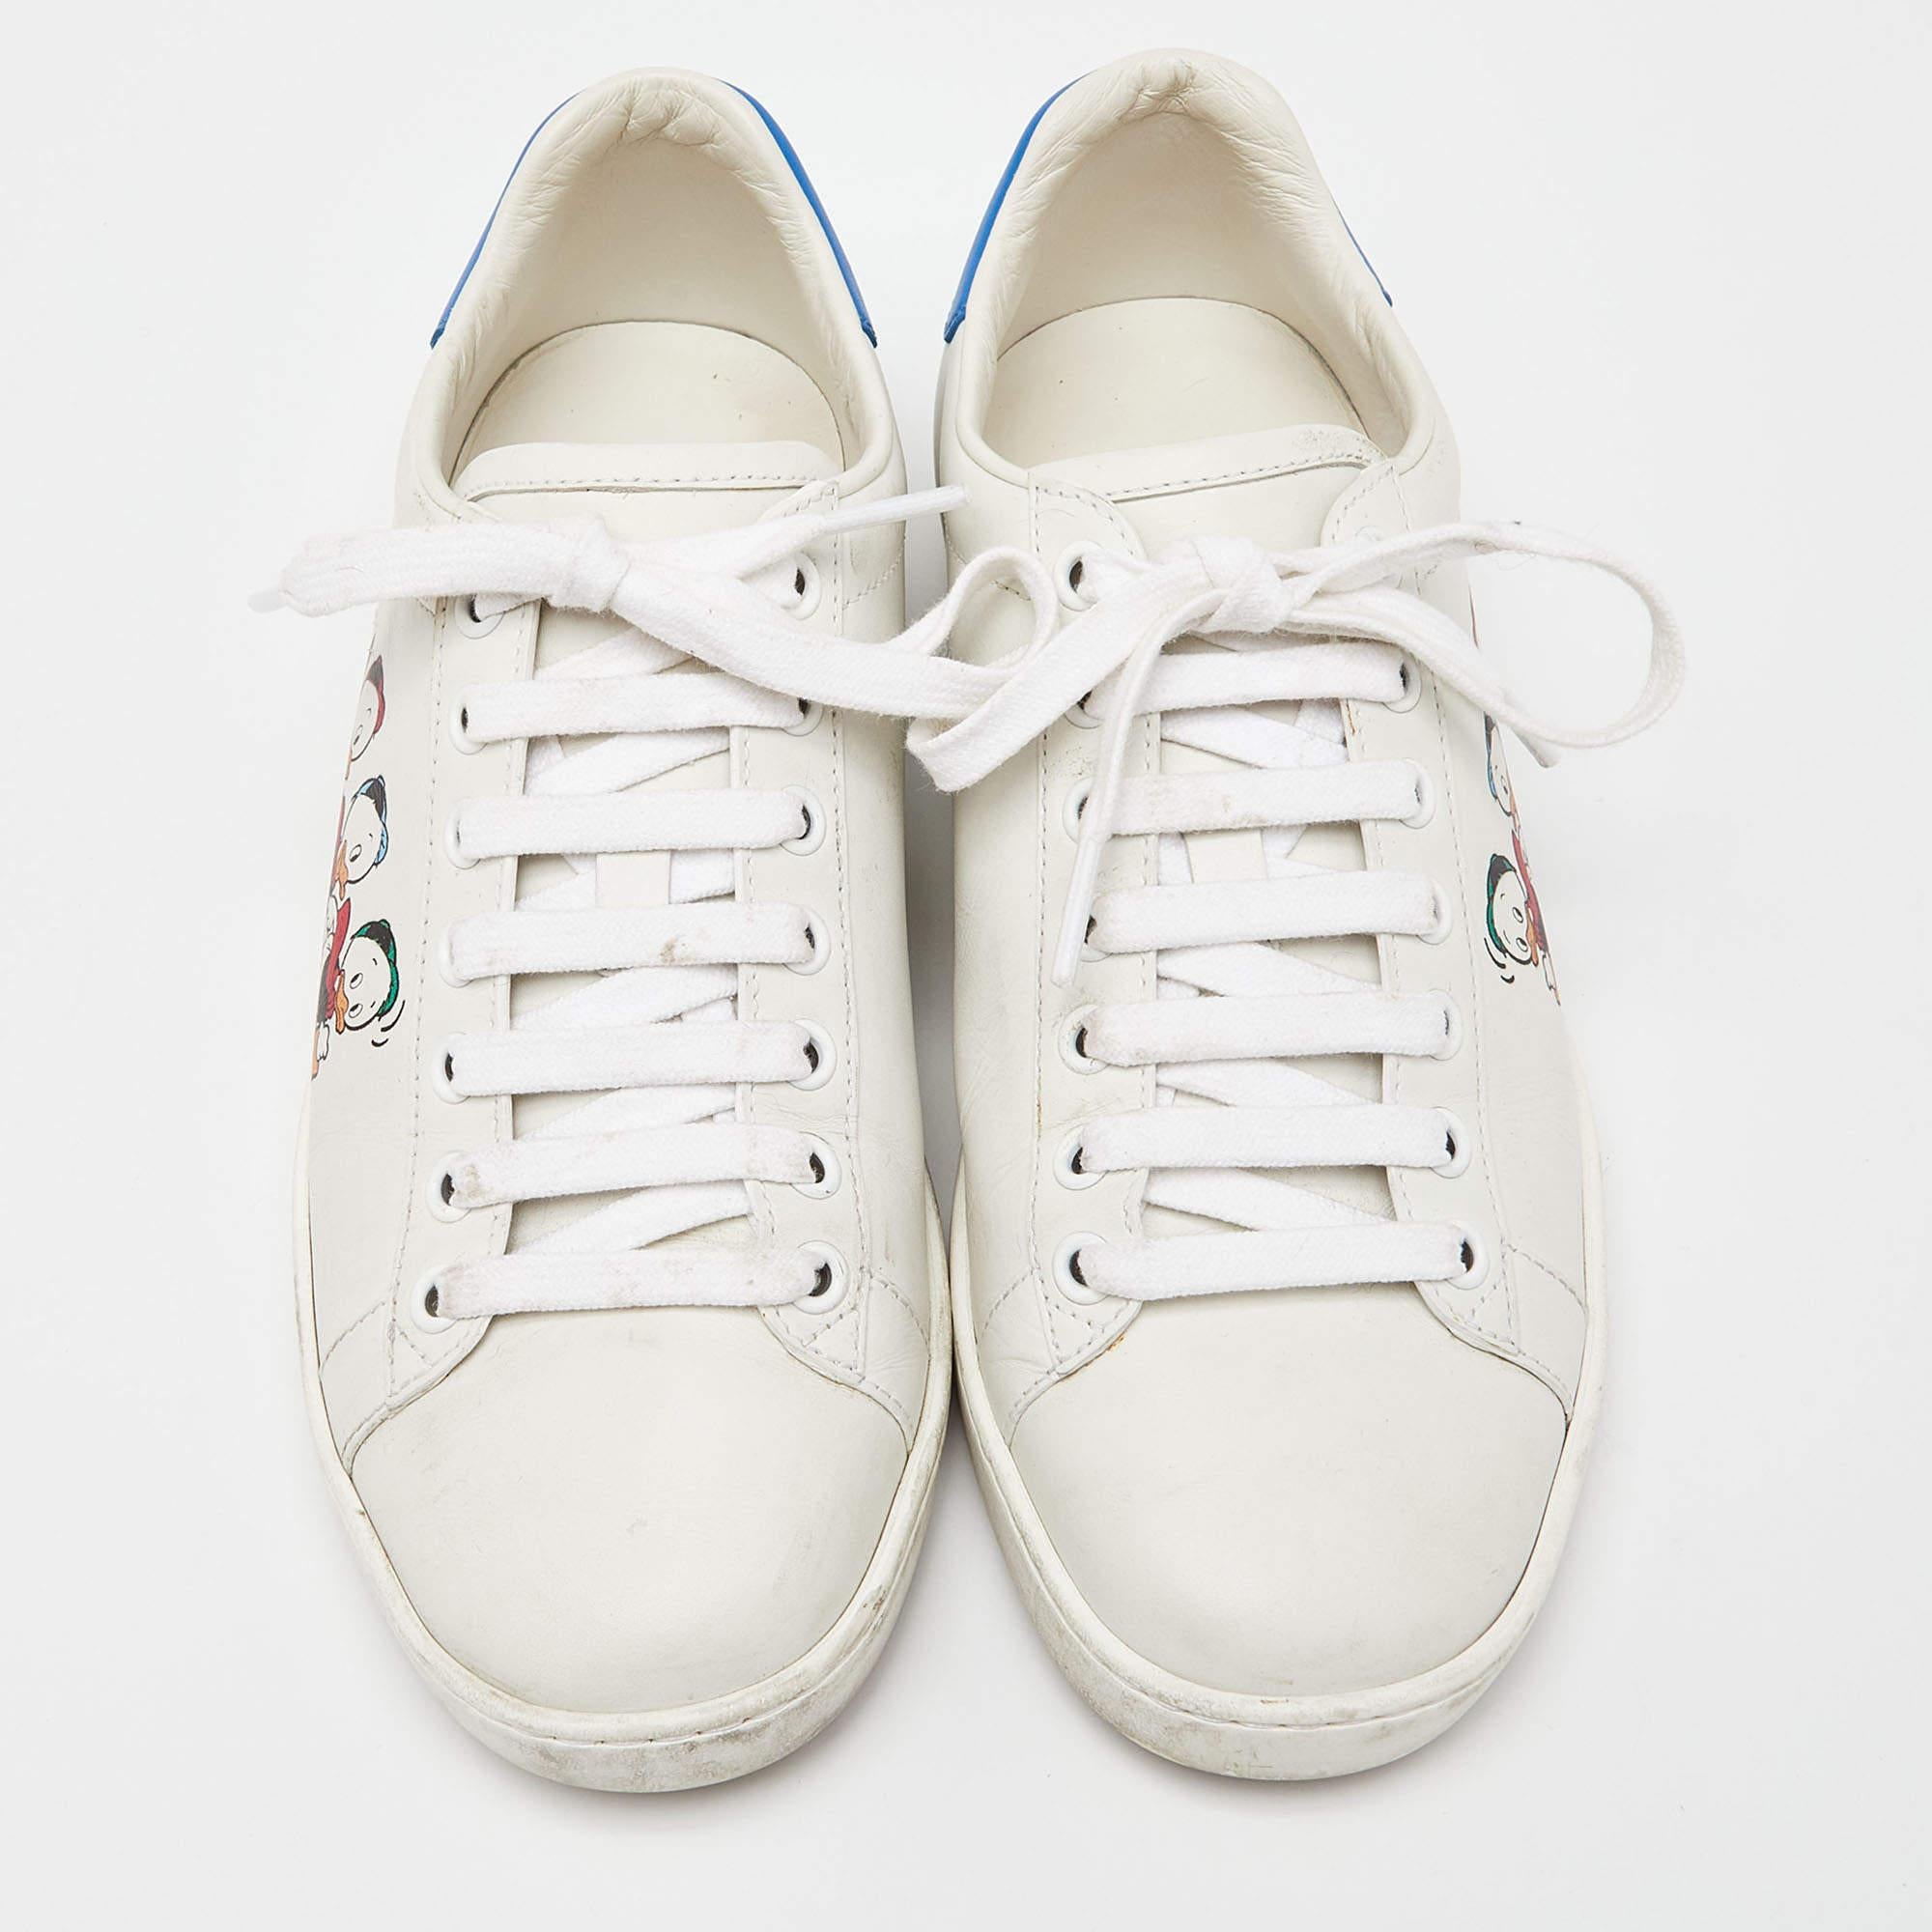 Give your outfit a luxe update with this pair of Gucci x Disney Ace sneakers. The shoes are sewn perfectly to help you make a statement in them for a long time.

